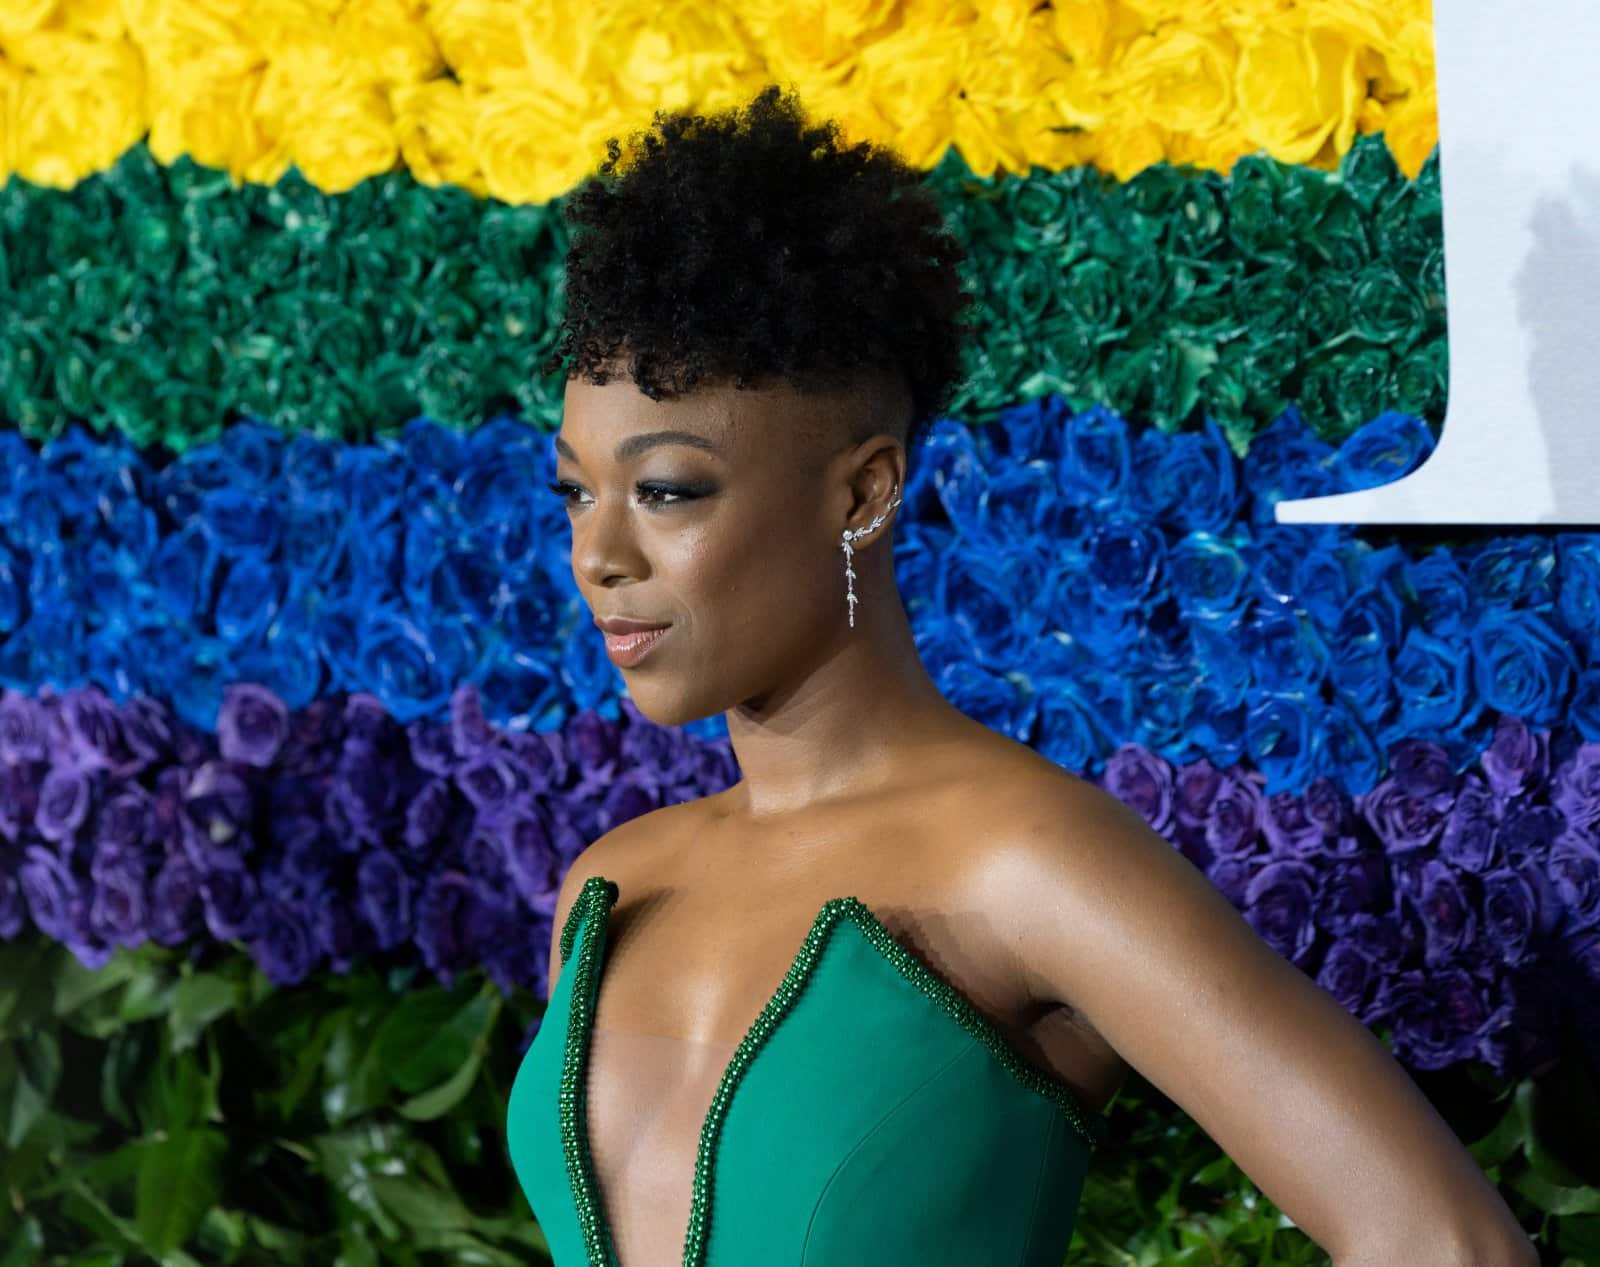 Image Credit: Shutterstock / lev radin <p><span>At the Outfest Legacy Awards in 2016, Samira Wiley shared her journey of self-acceptance and the importance of LGBTQ+ representation in the arts, highlighting how visibility can change perceptions and lives.</span></p>